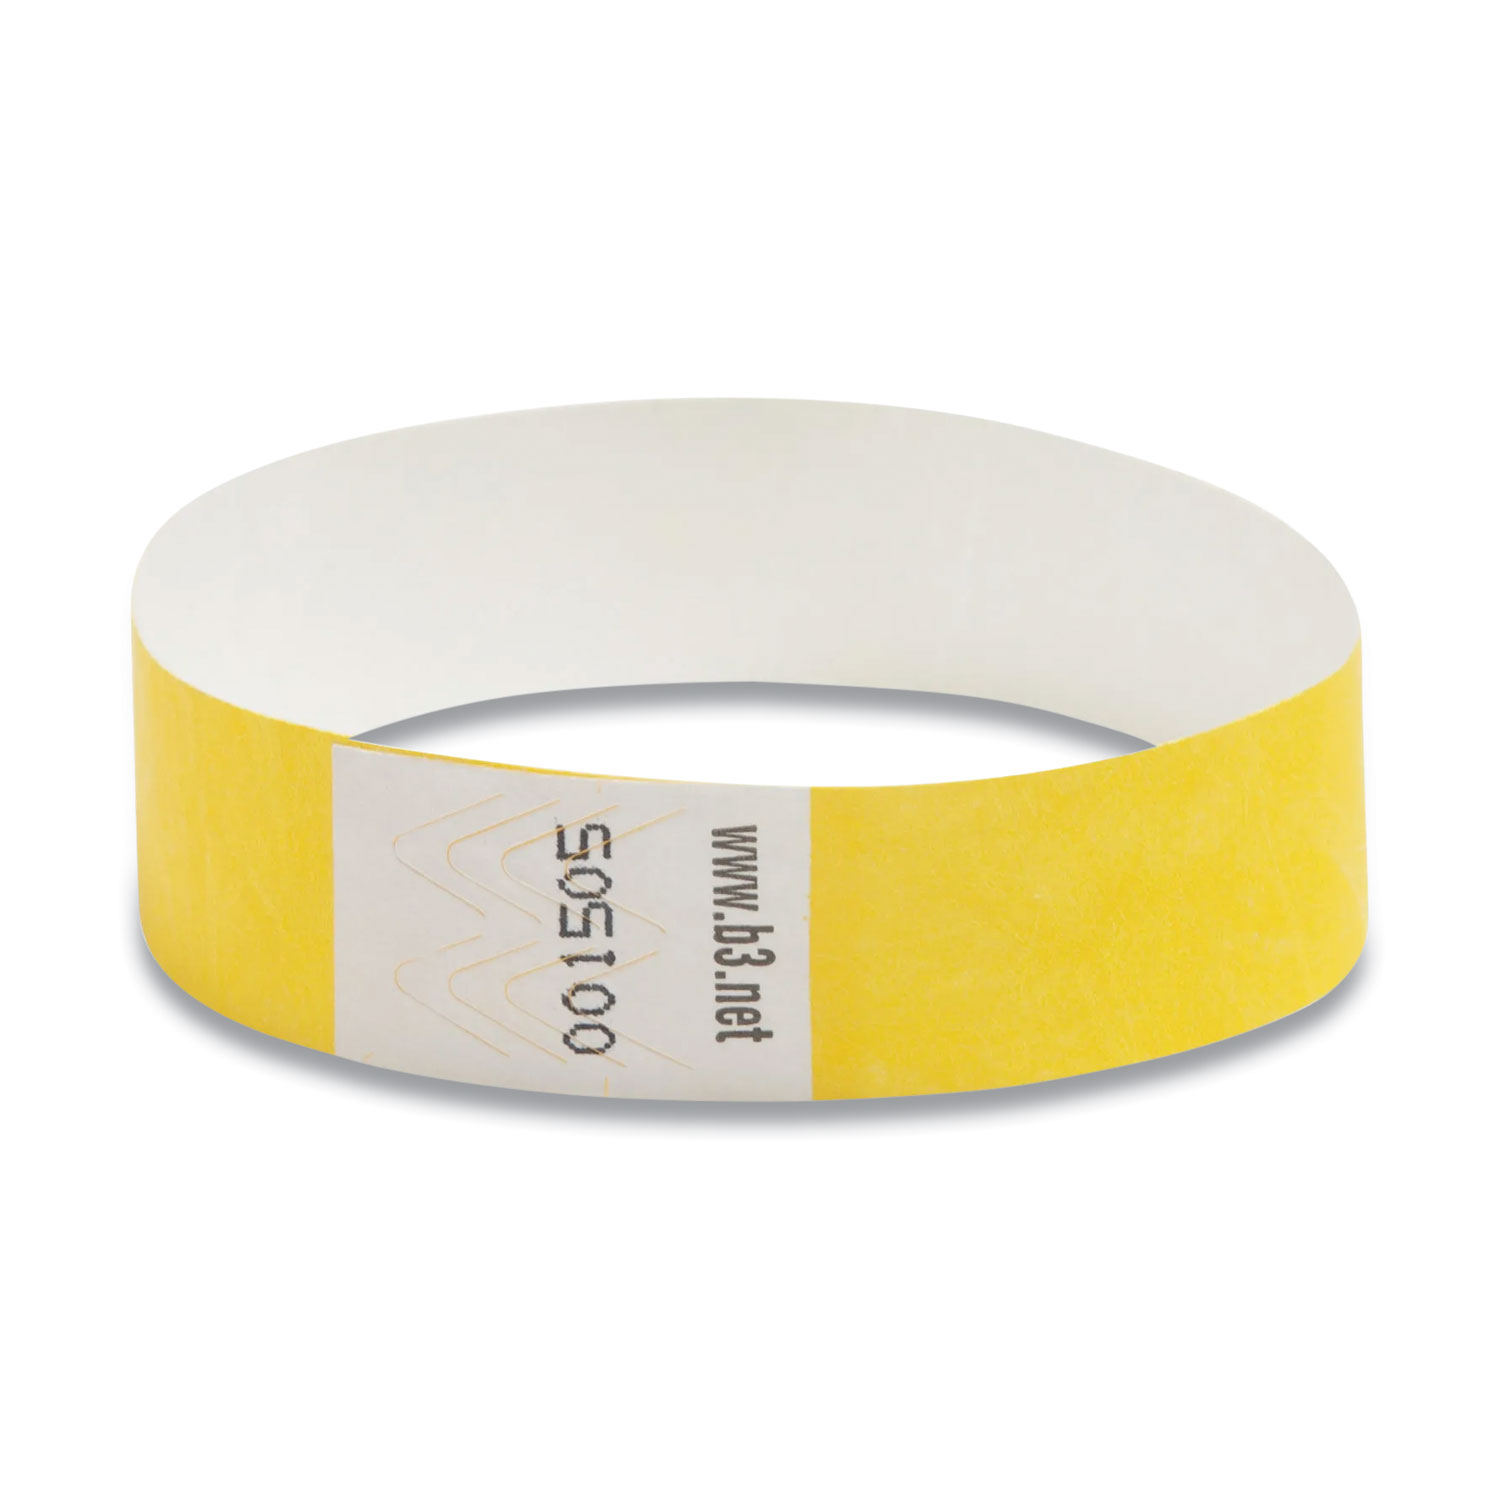  SICURIX 85070 Security Wristbands, 0.75 x 10, Yellow, 100/Pack (BAU228126) 